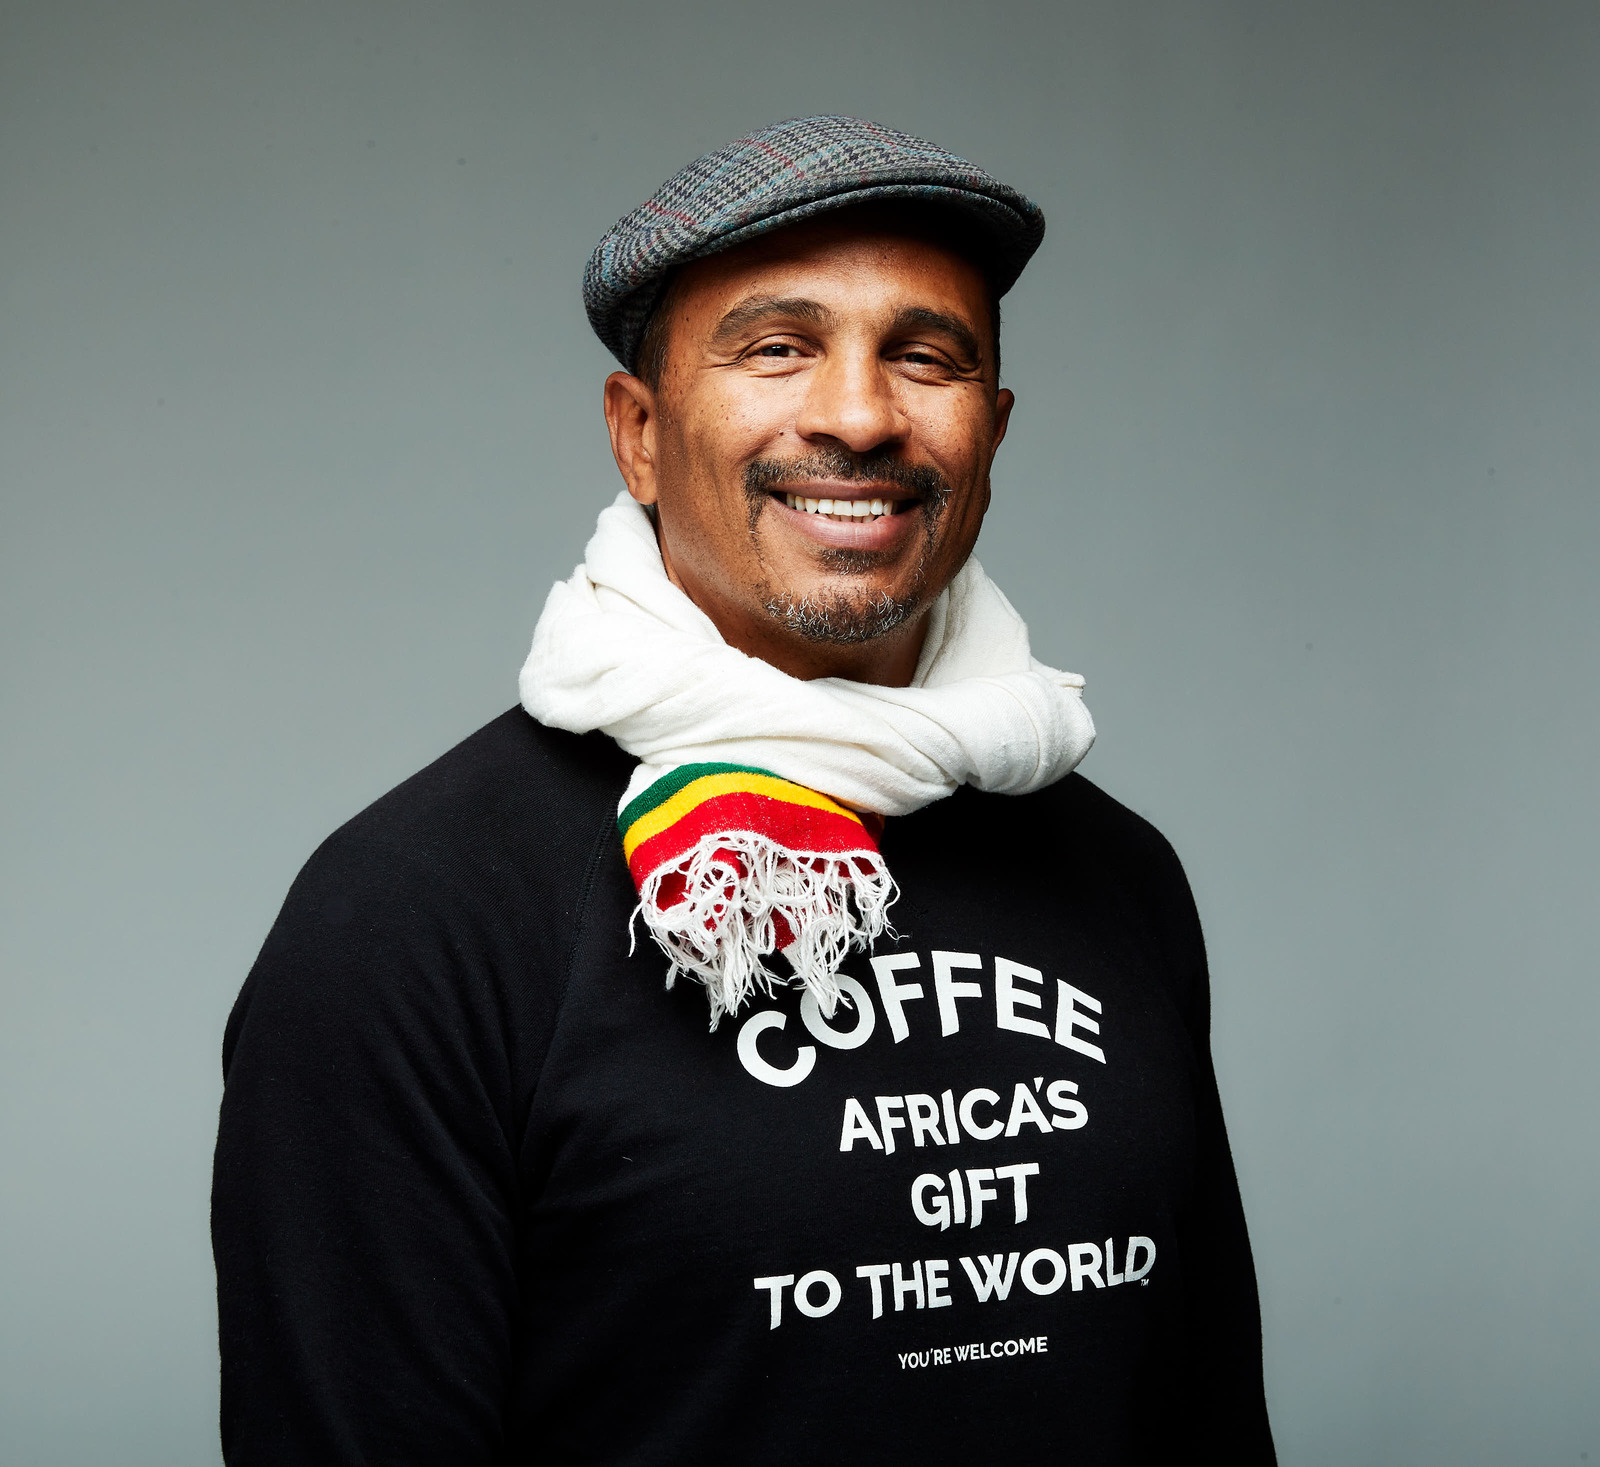 Red Bay Coffee Founder Keba Konte: "Coffee is Africa's Gift to The World"